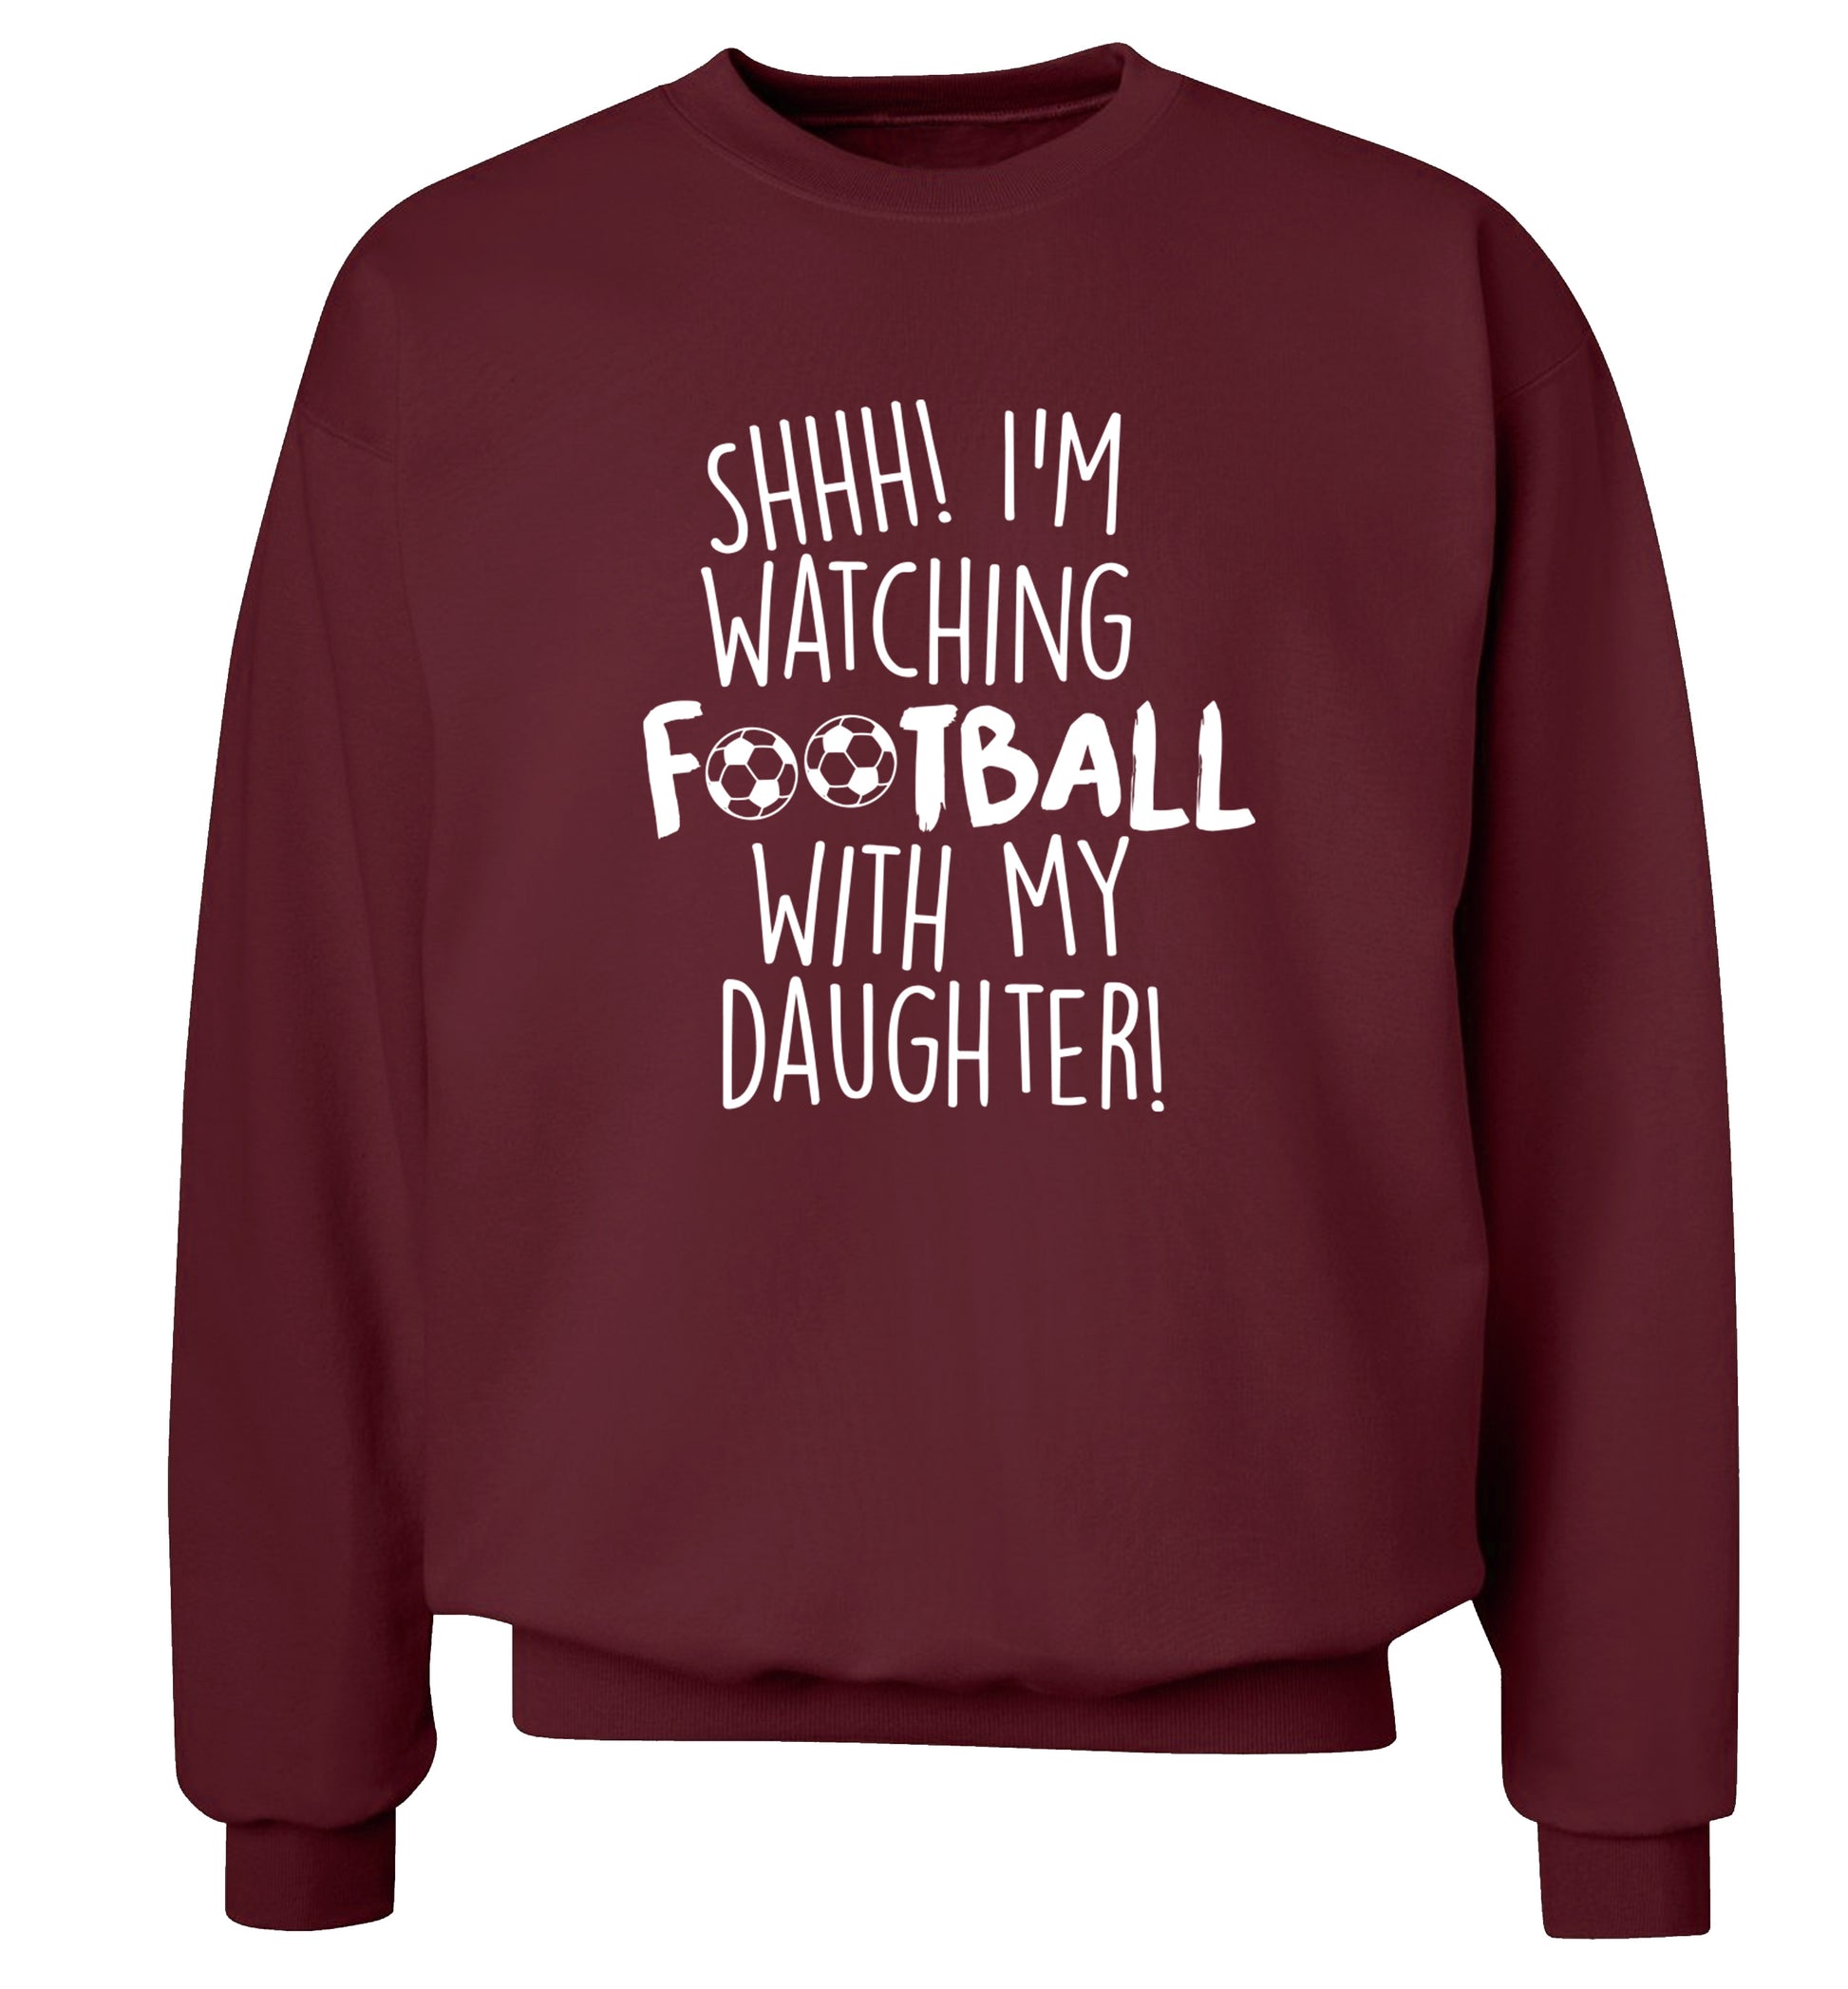 Shhh I'm watching football with my daughter Adult's unisexmaroon Sweater 2XL